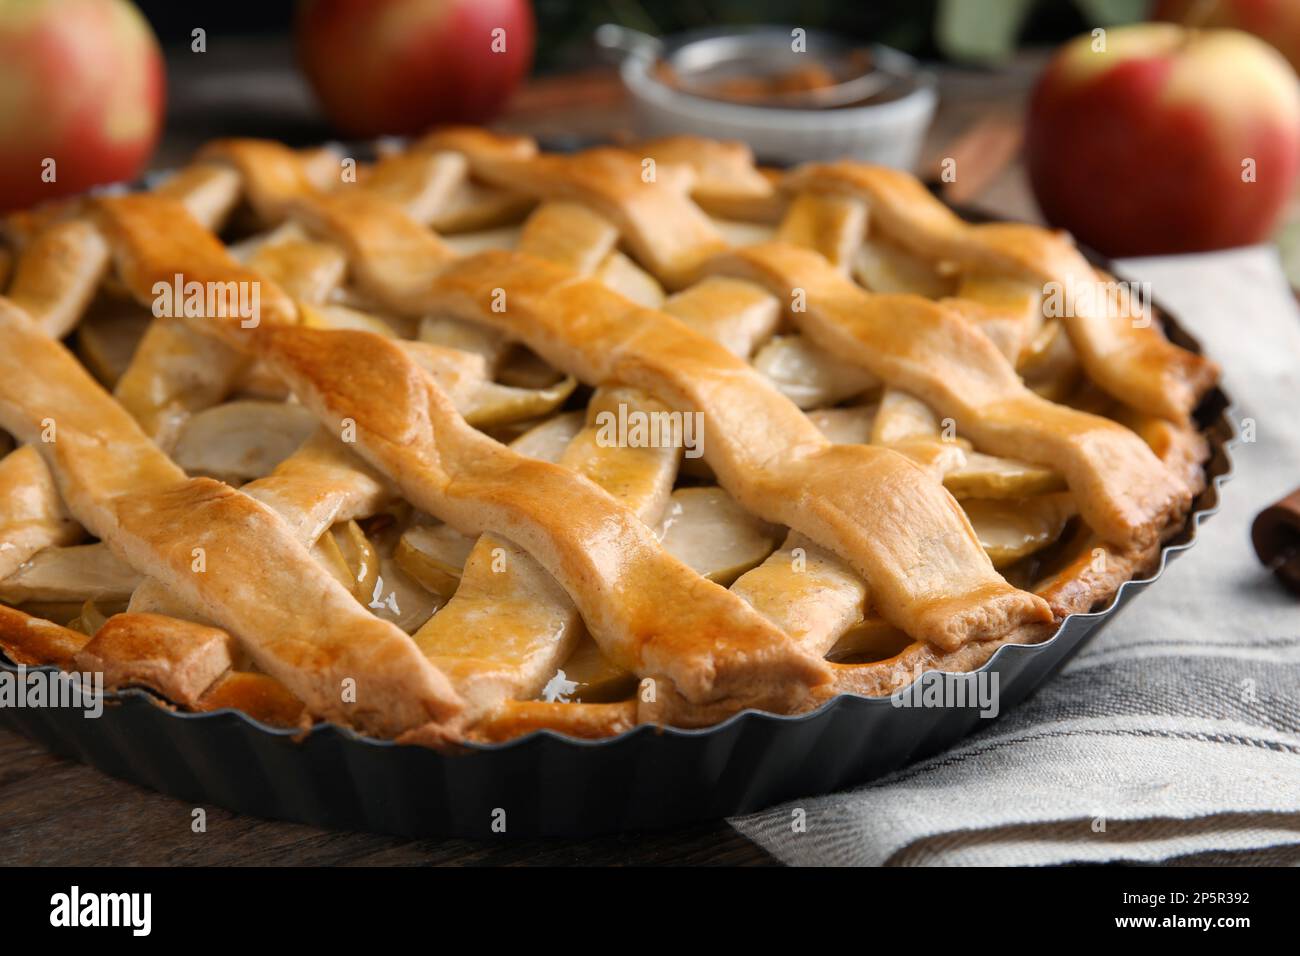 Delicious traditional apple pie on wooden table, closeup Stock Photo